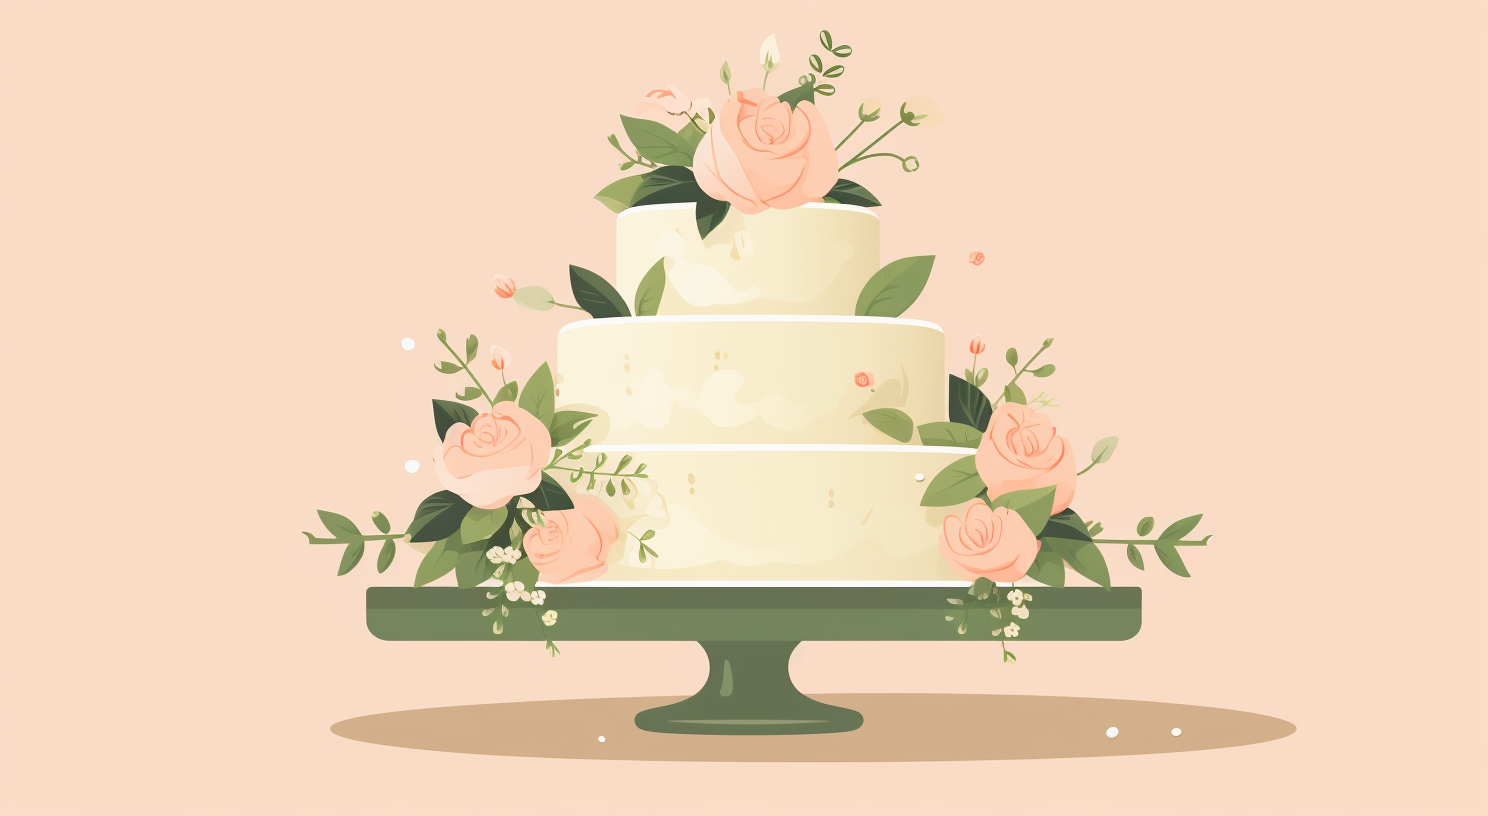 A three-tiered wedding cake decorated with pink flowers and leaves.